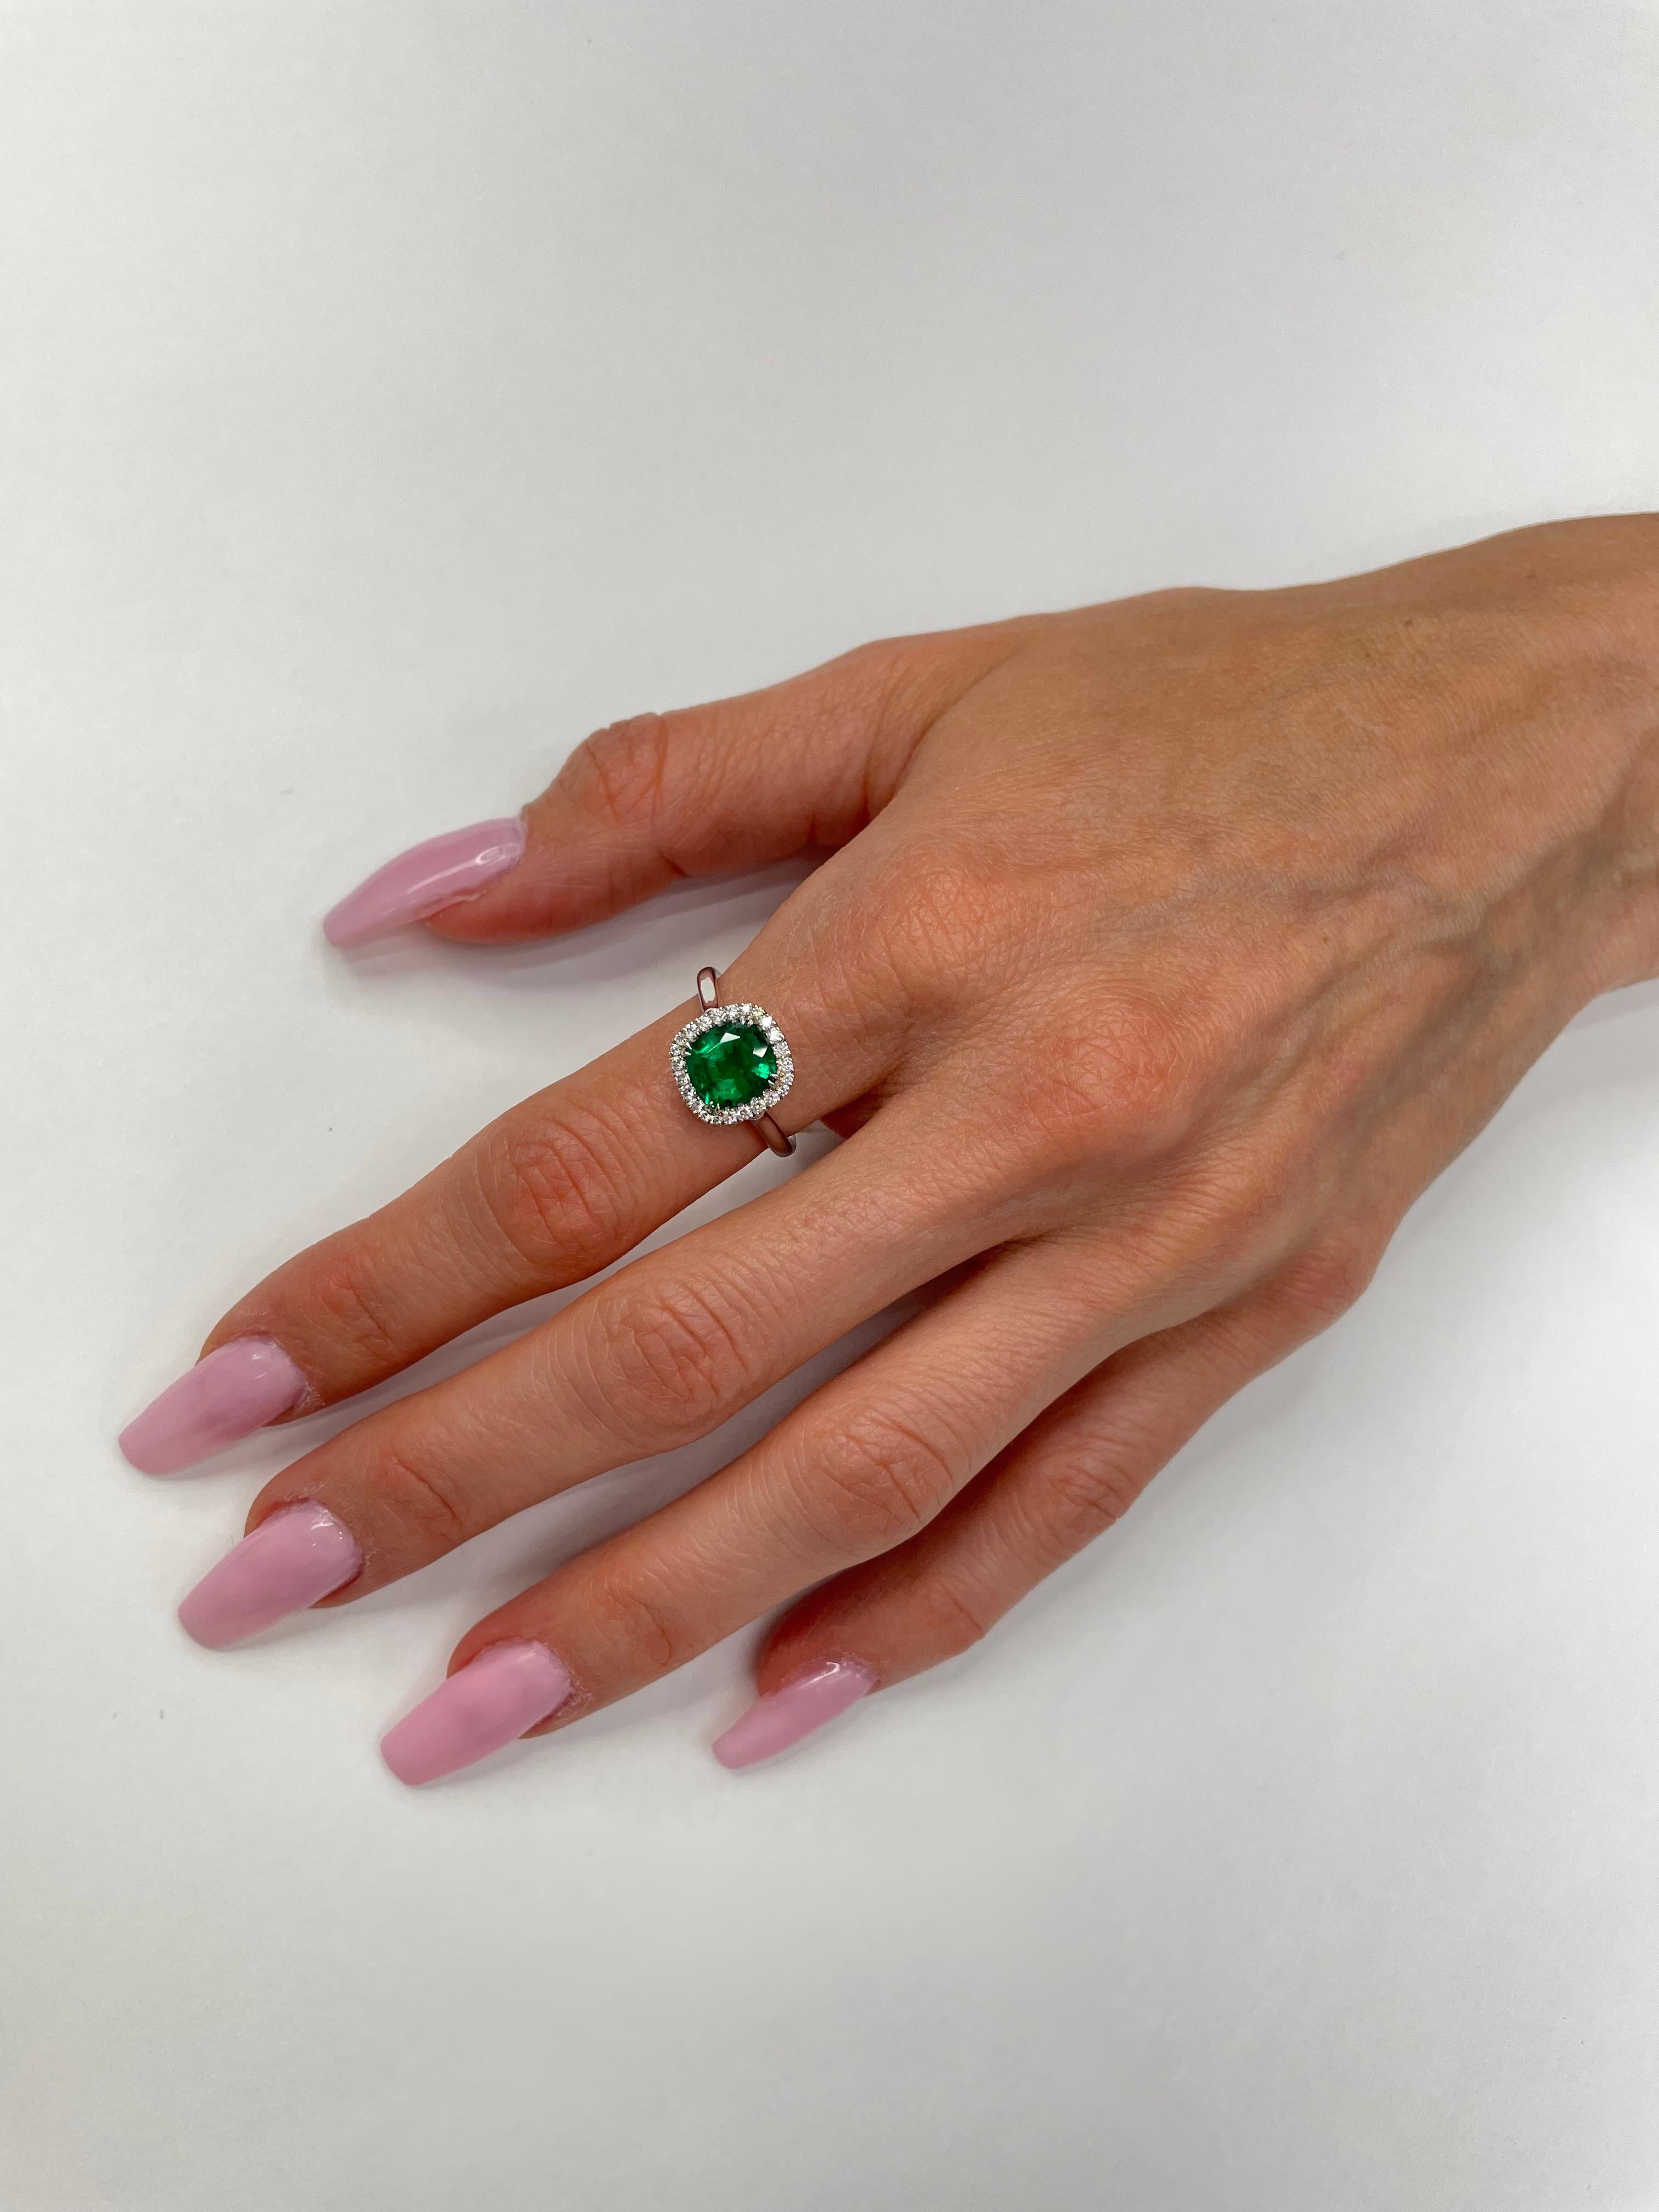 A 1.72ct Cushion cut Green Emerald set in 18K white Gold + 24 round brilliant G-H color, VS clarity = 0.20cttw